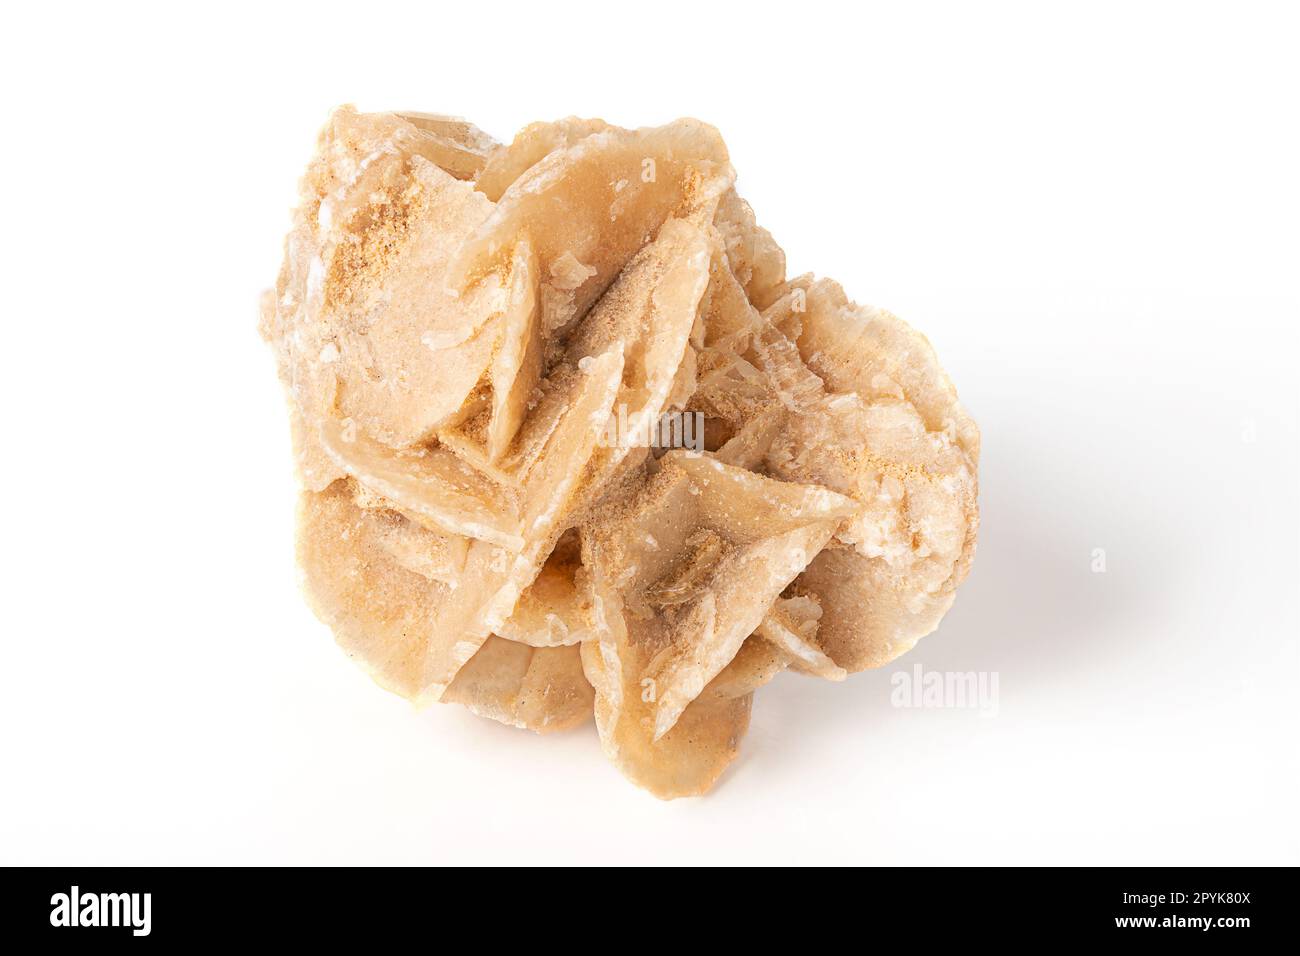 Desert rose, crystal cluster from Tunisia, Sahara rose, front view Stock Photo